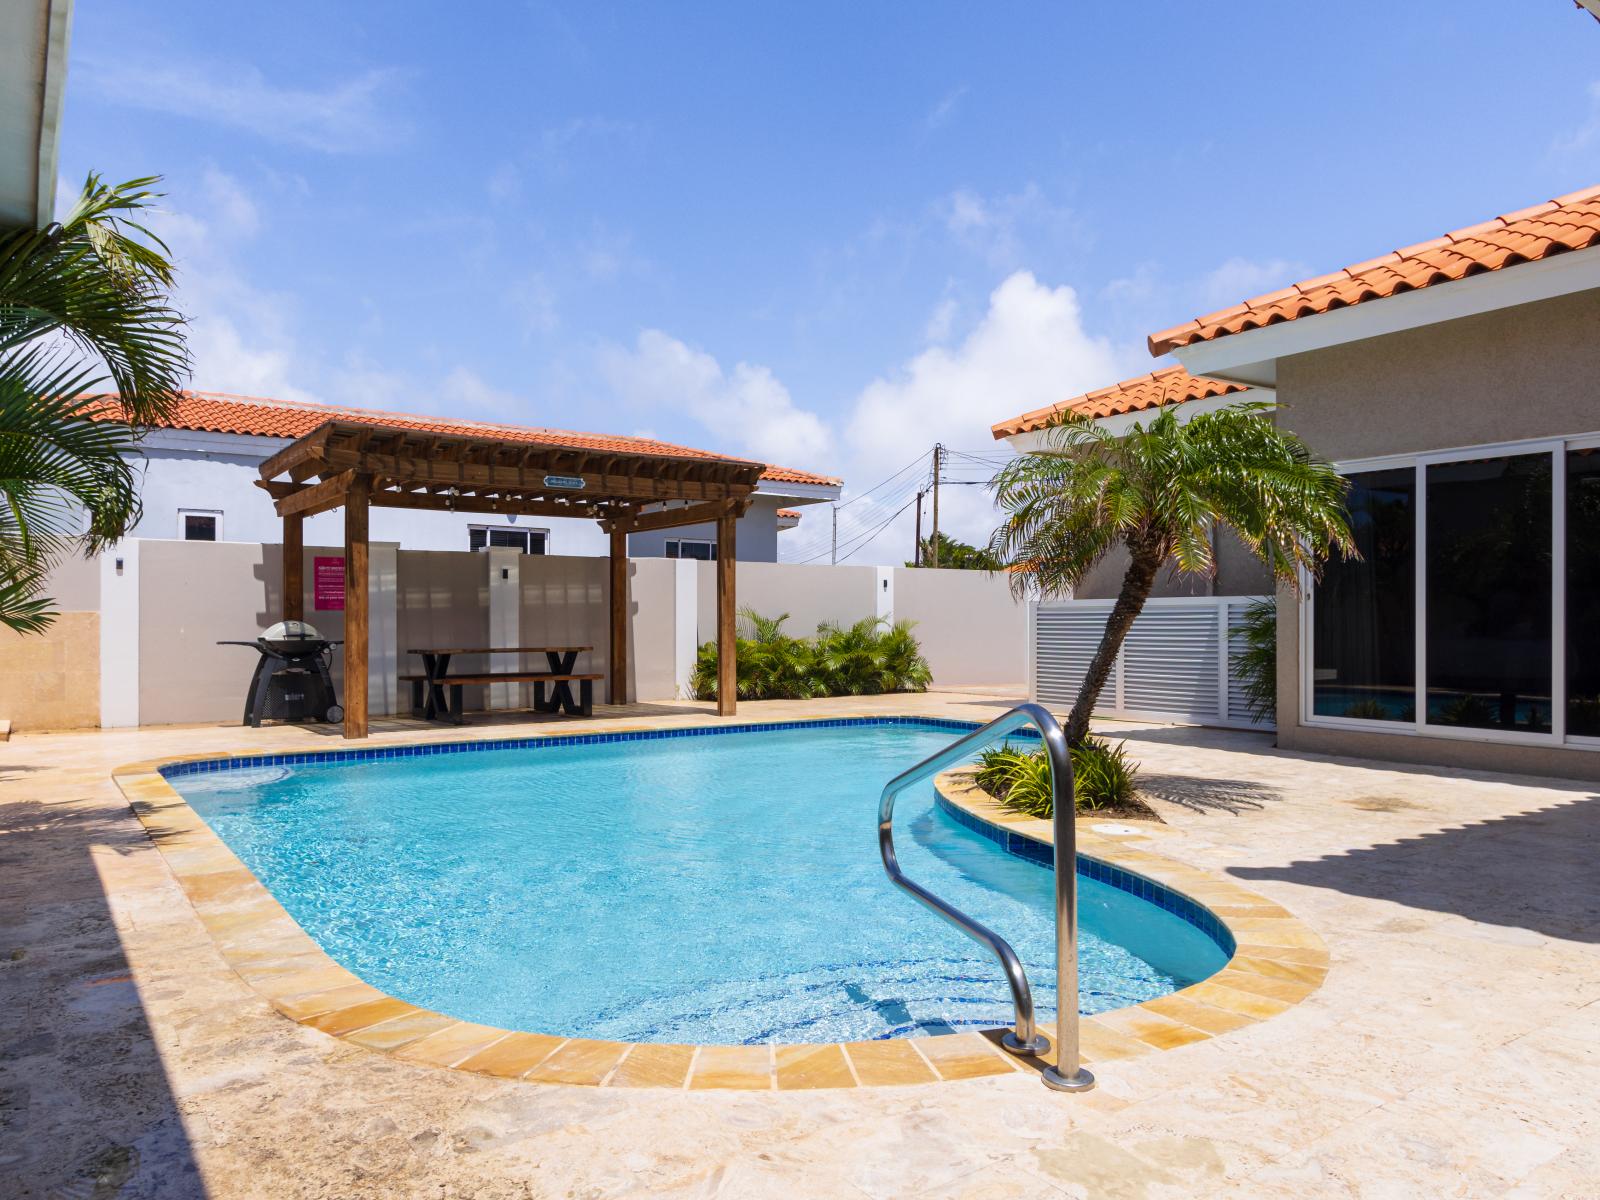 Luxury pool area of the apartment in Noord, Aruba - Lush and refreshing environment - Cozy beach chairs available - Beautifully sunbathed space makes the soul peaceful - Experience the comfort at the best